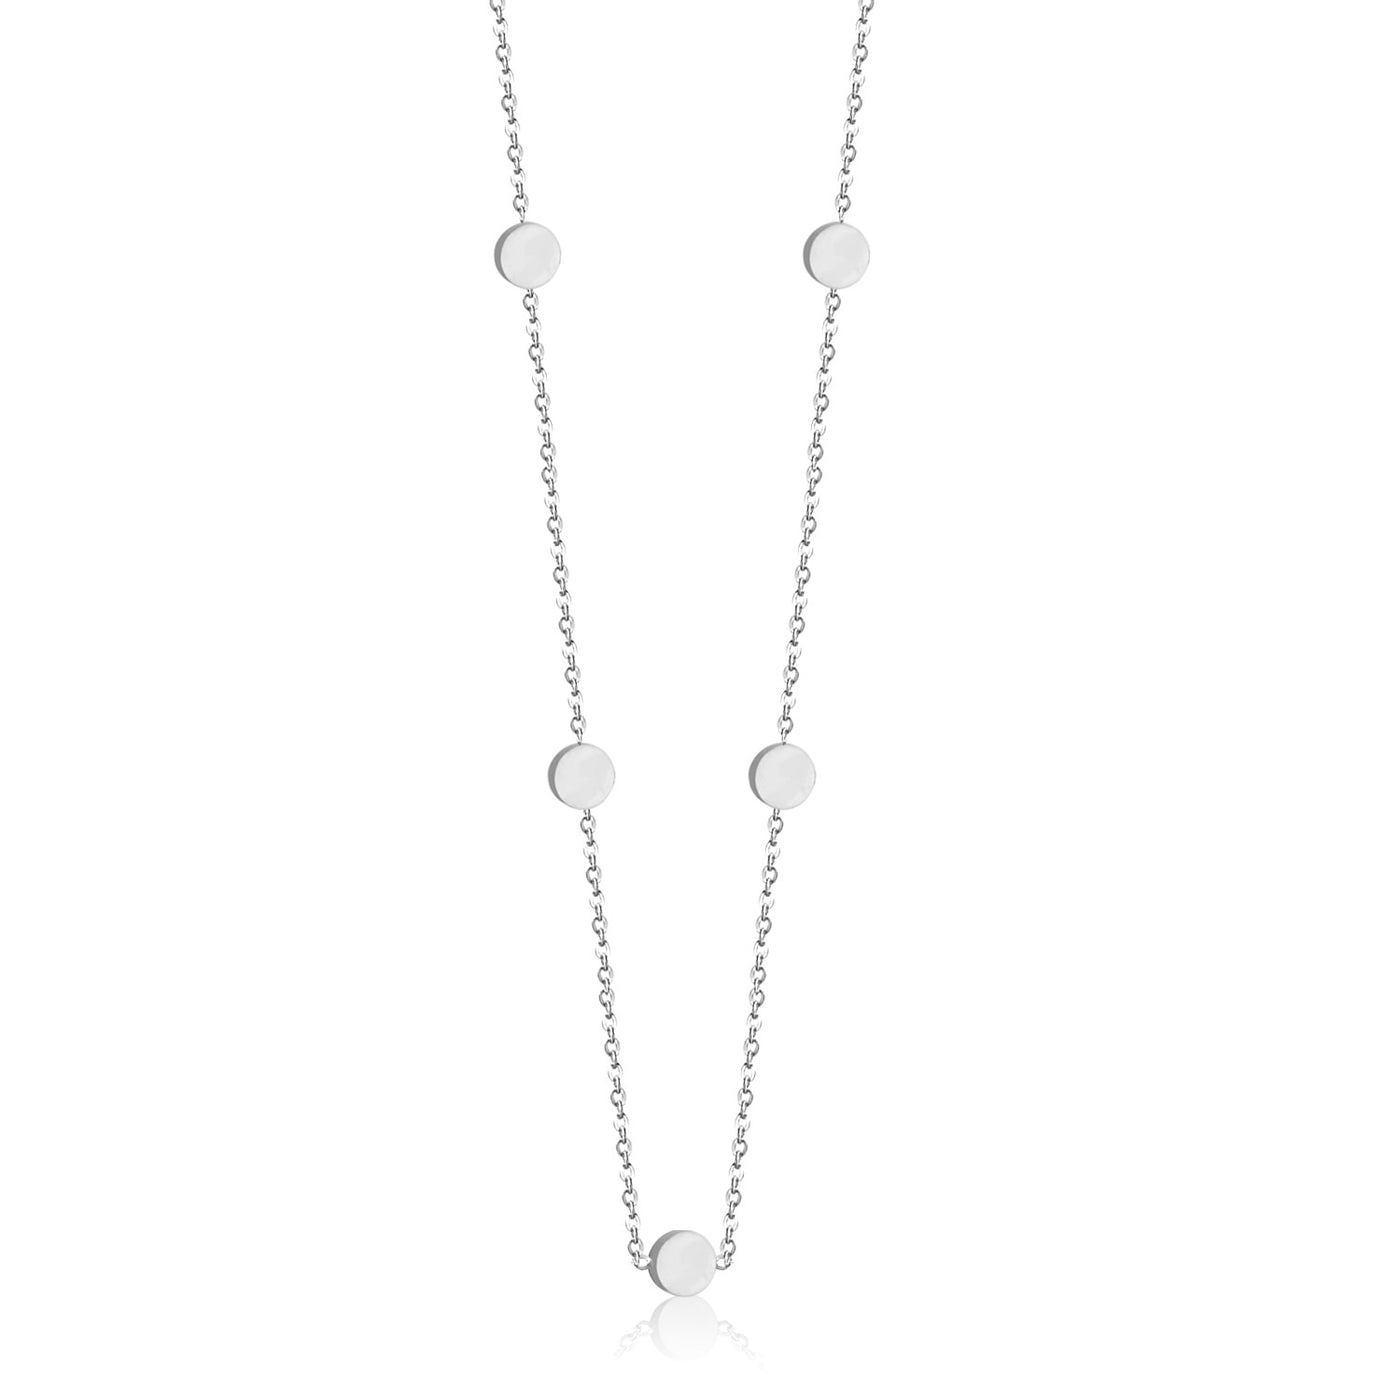 Stainless Steel Link Chains Round Pendant Necklace - csjewellery.net